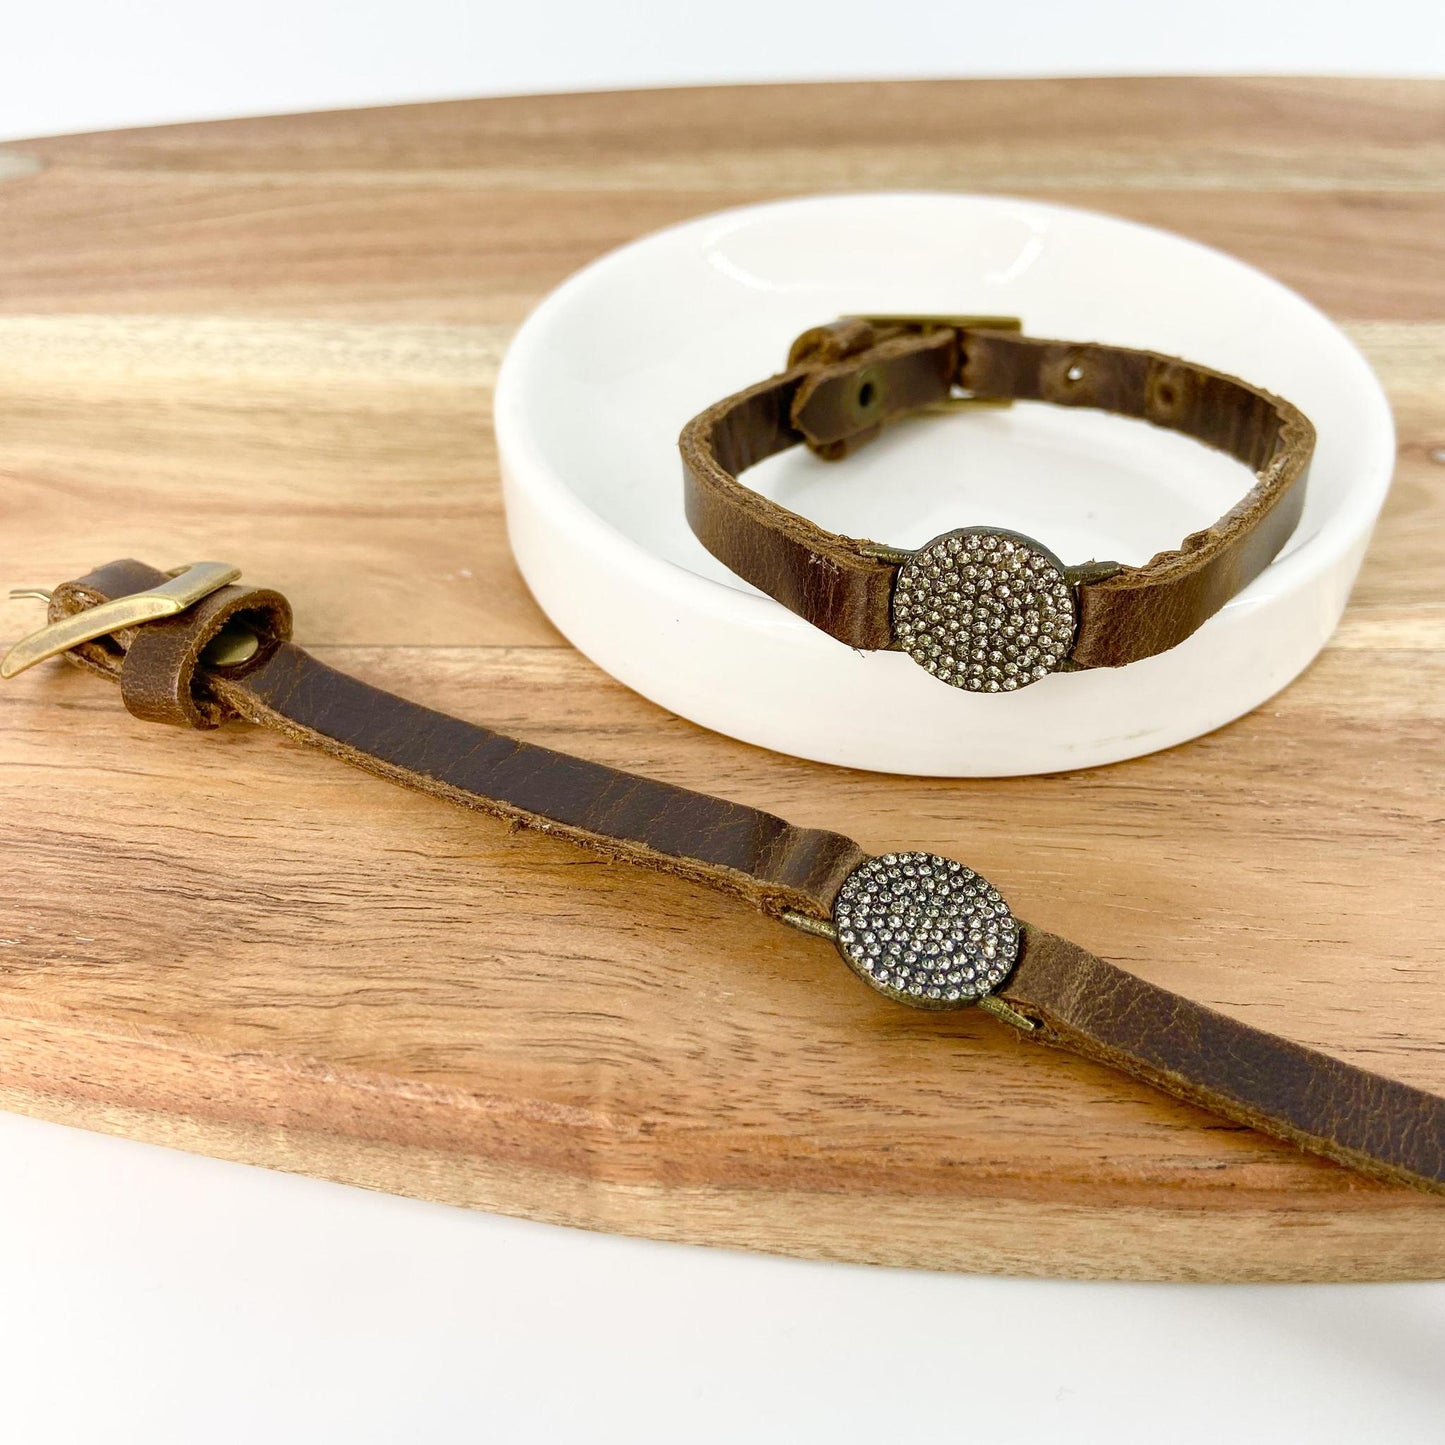 Bracelet - Small Disc with Crystals - Antiqued Brass & Leather (Video)